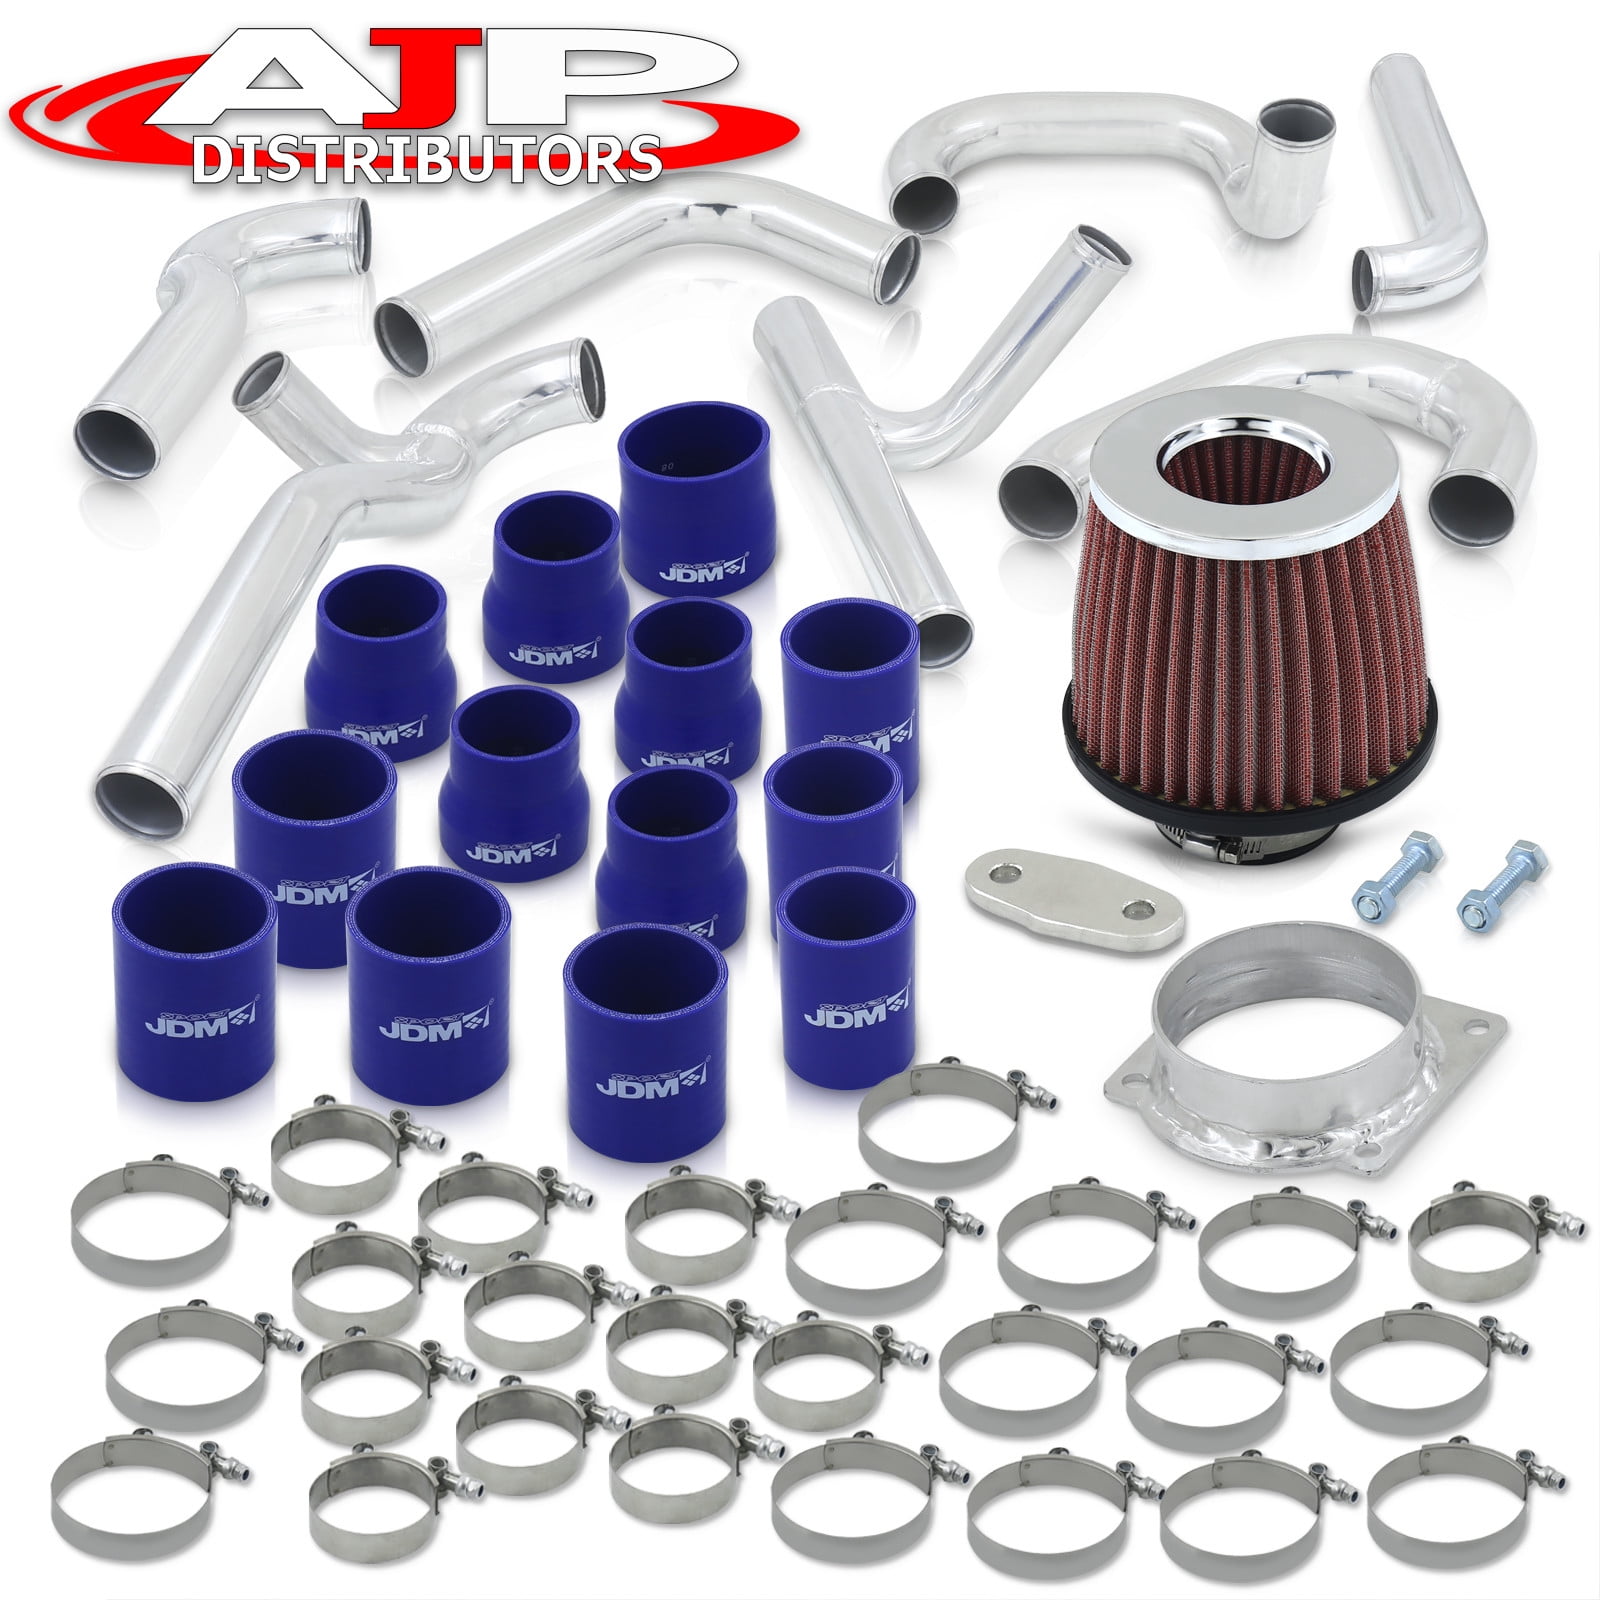 4.0" UNIVERSAL ALUMINUM INTERCOOLER TURBO PIPING PIPE KIT+SILICONE+CLAMP BLUE